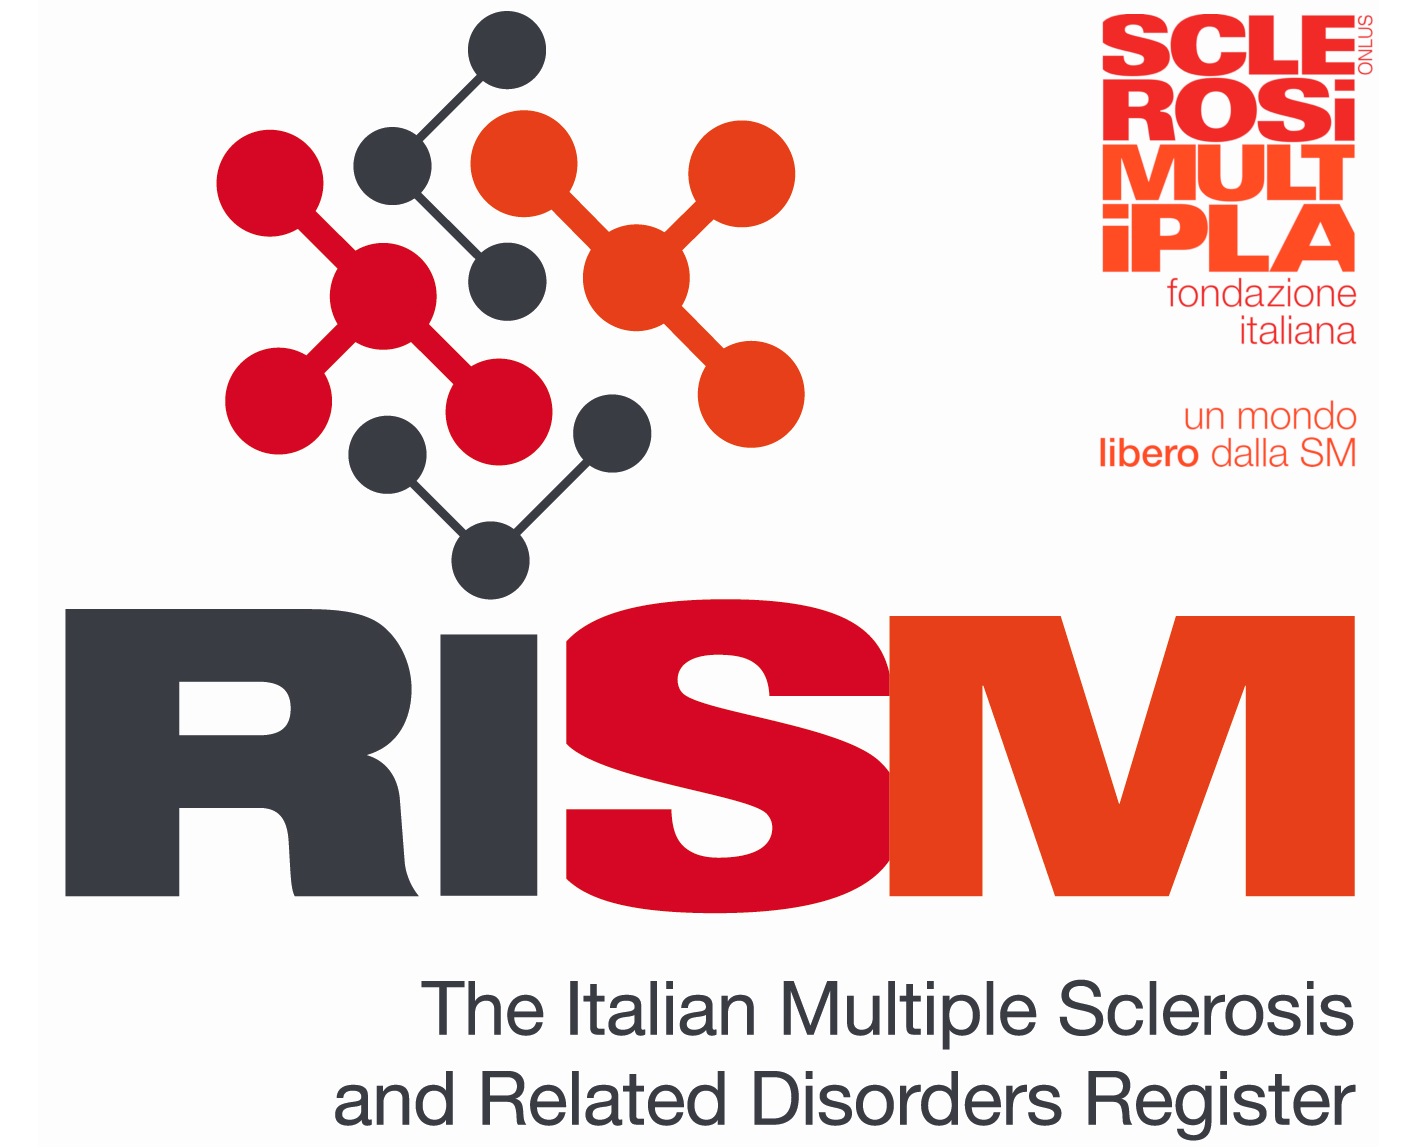 The Italian Multiple Sclerosis and Related Disorders Register